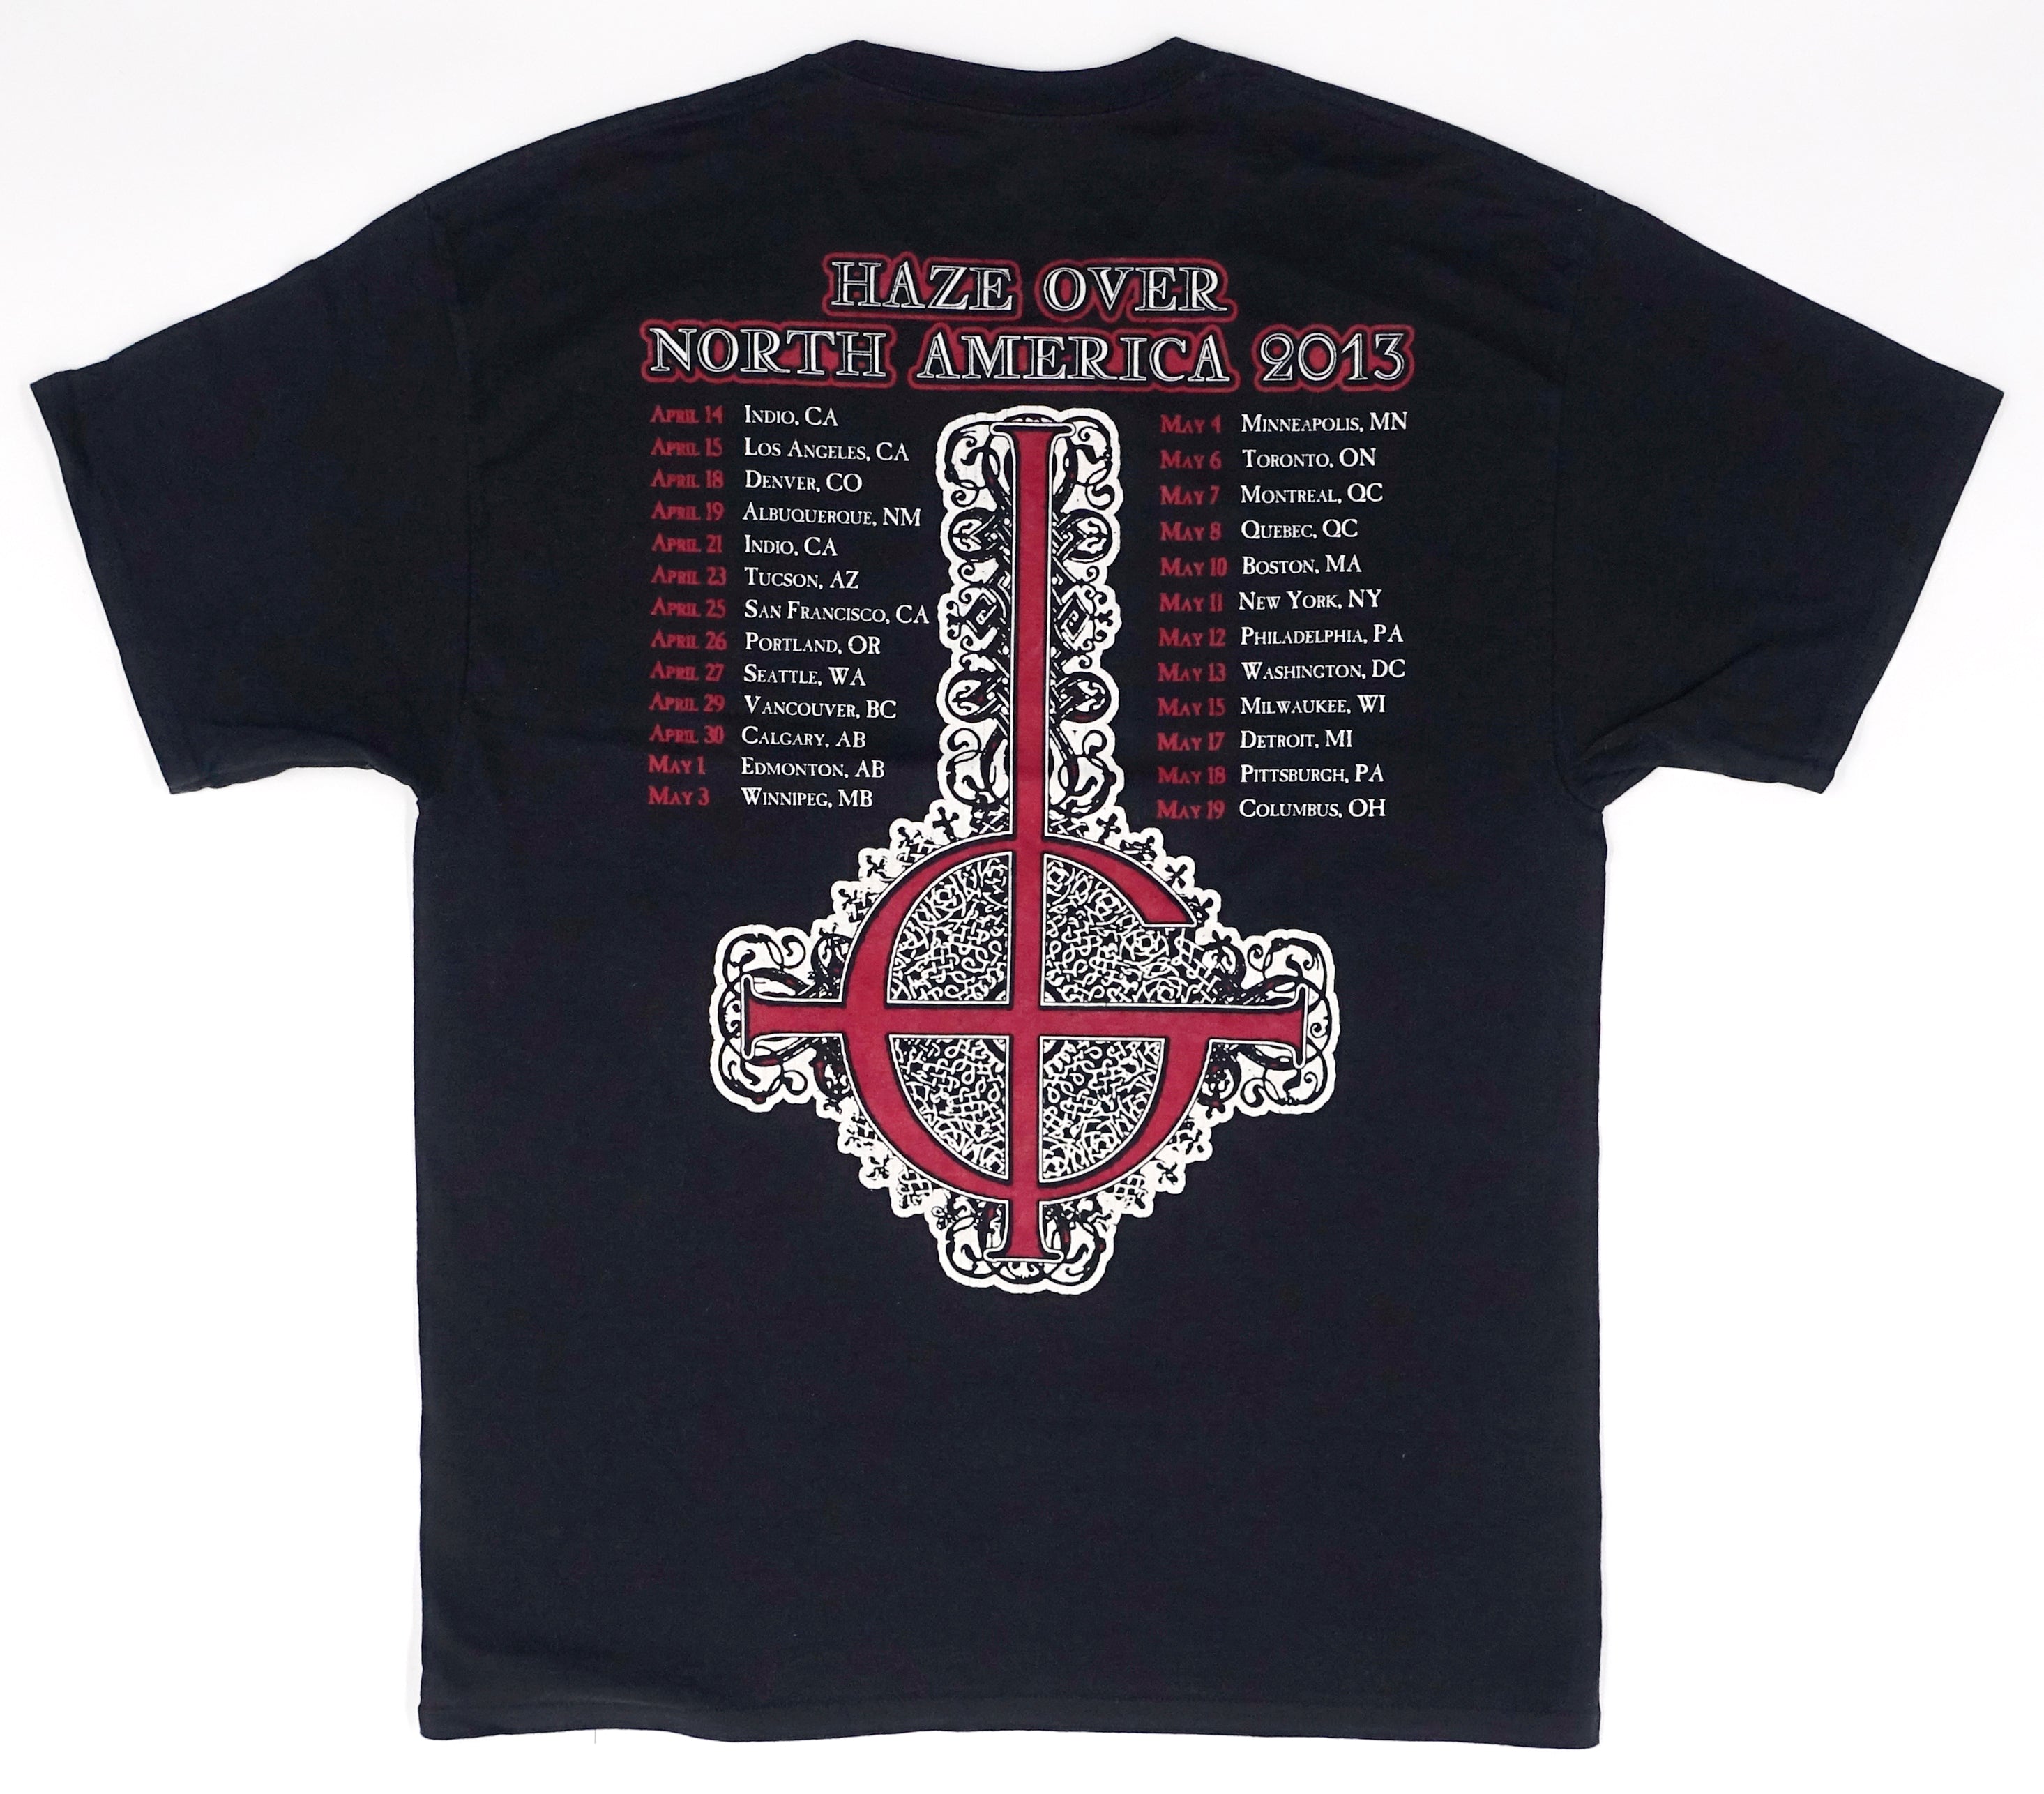 Ghost ‎– Haze Over North American 2013 Tour Shirt Size Large